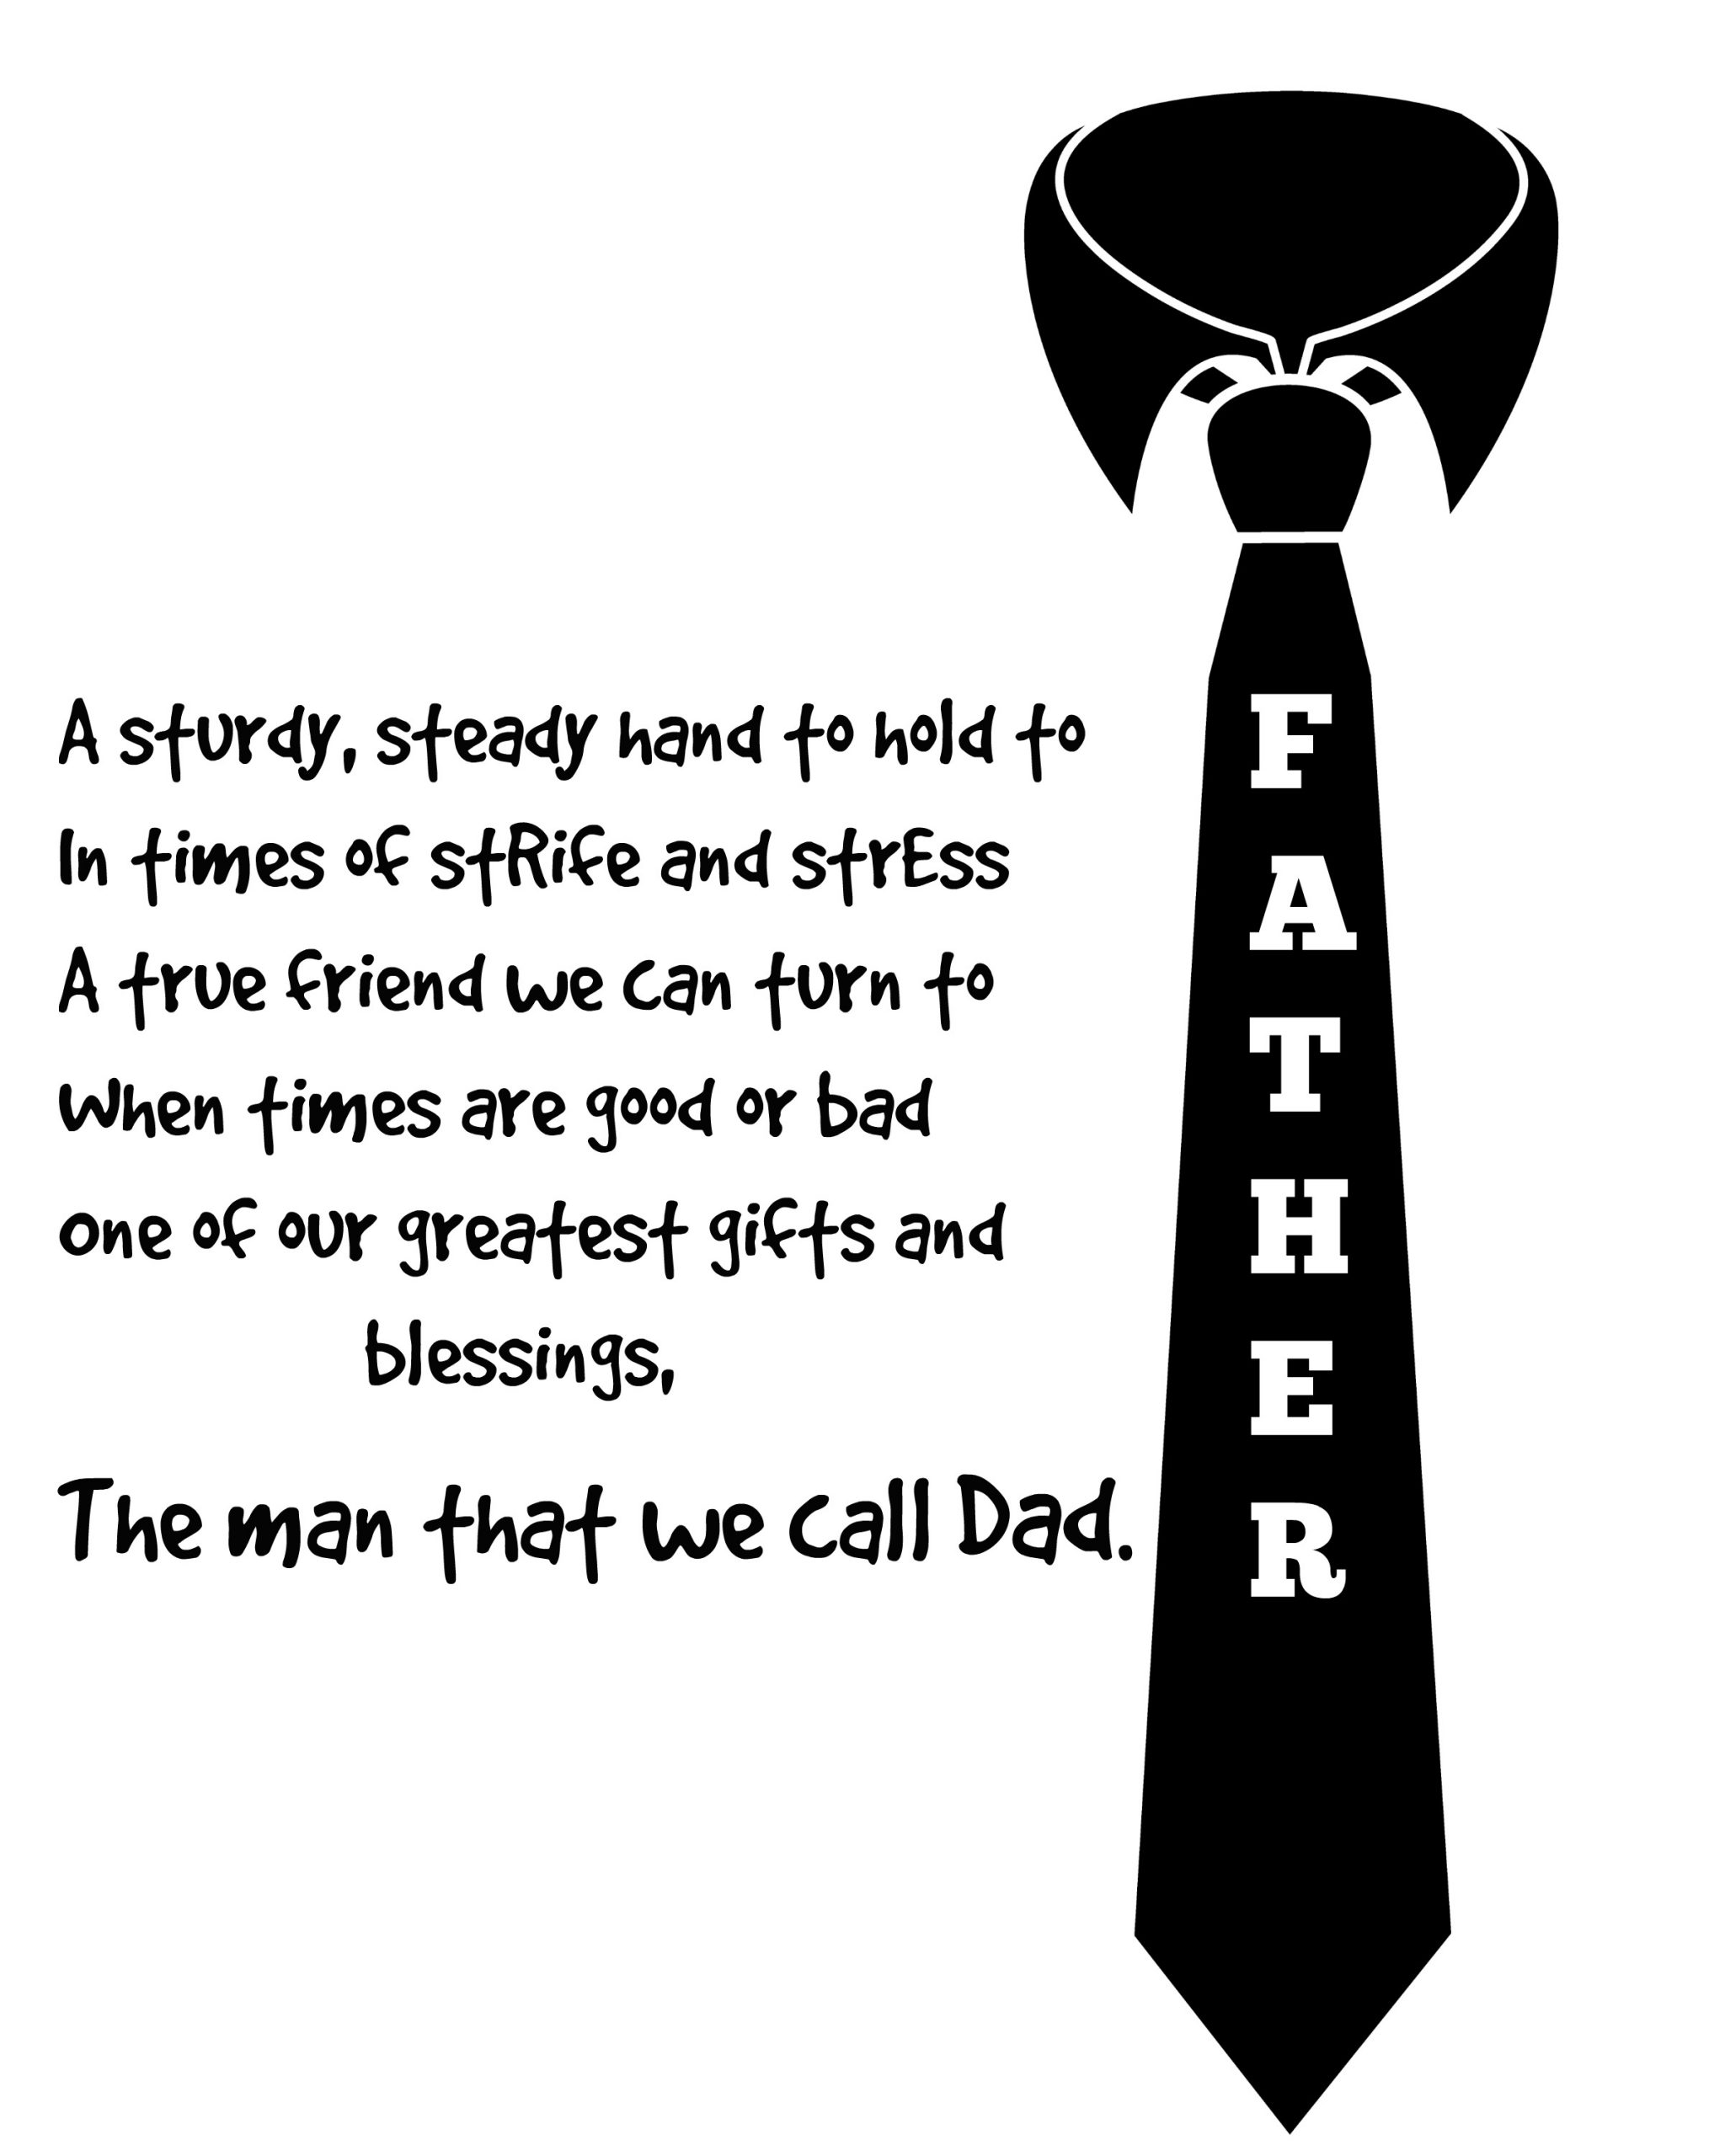 Fathers Day Poems Printable